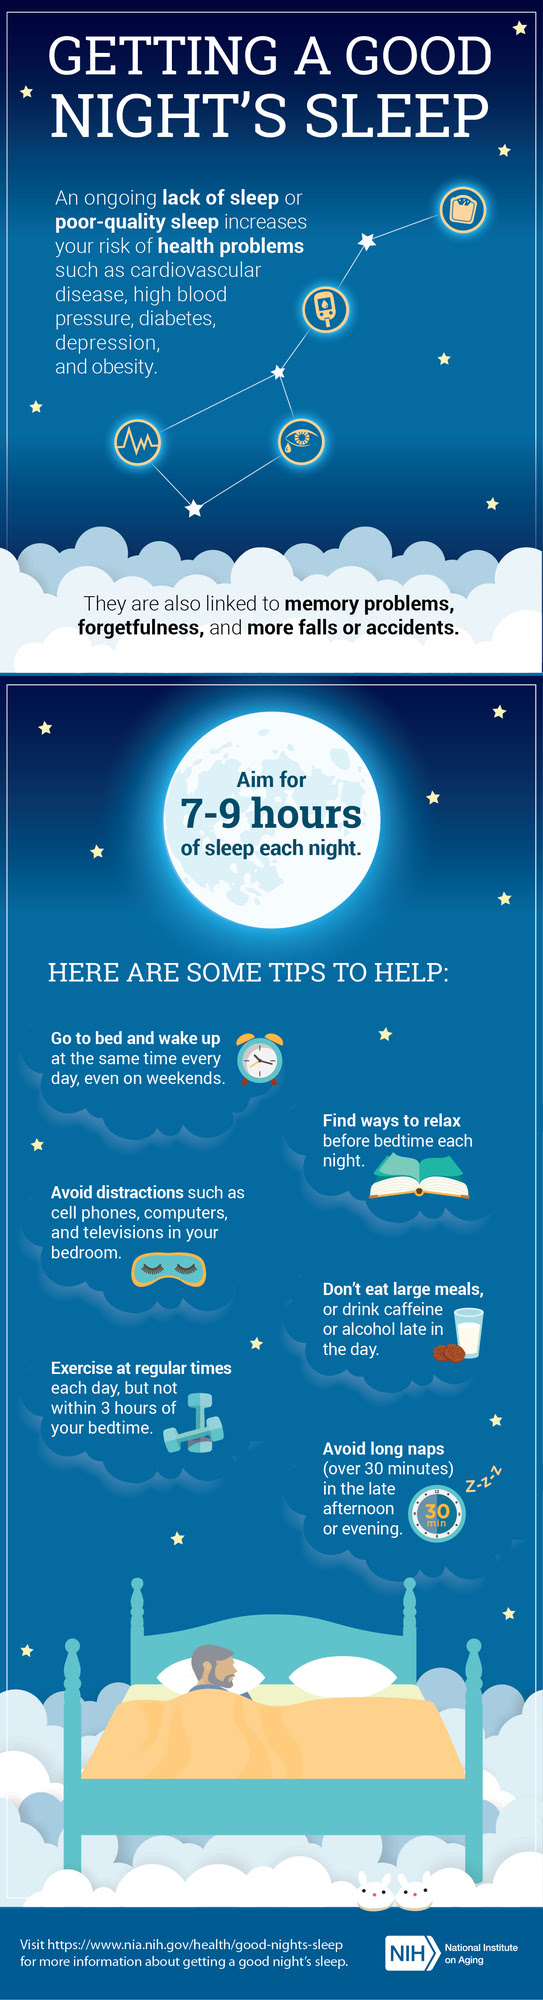 Infographic about getting a good night's sleep. Follow link for full description